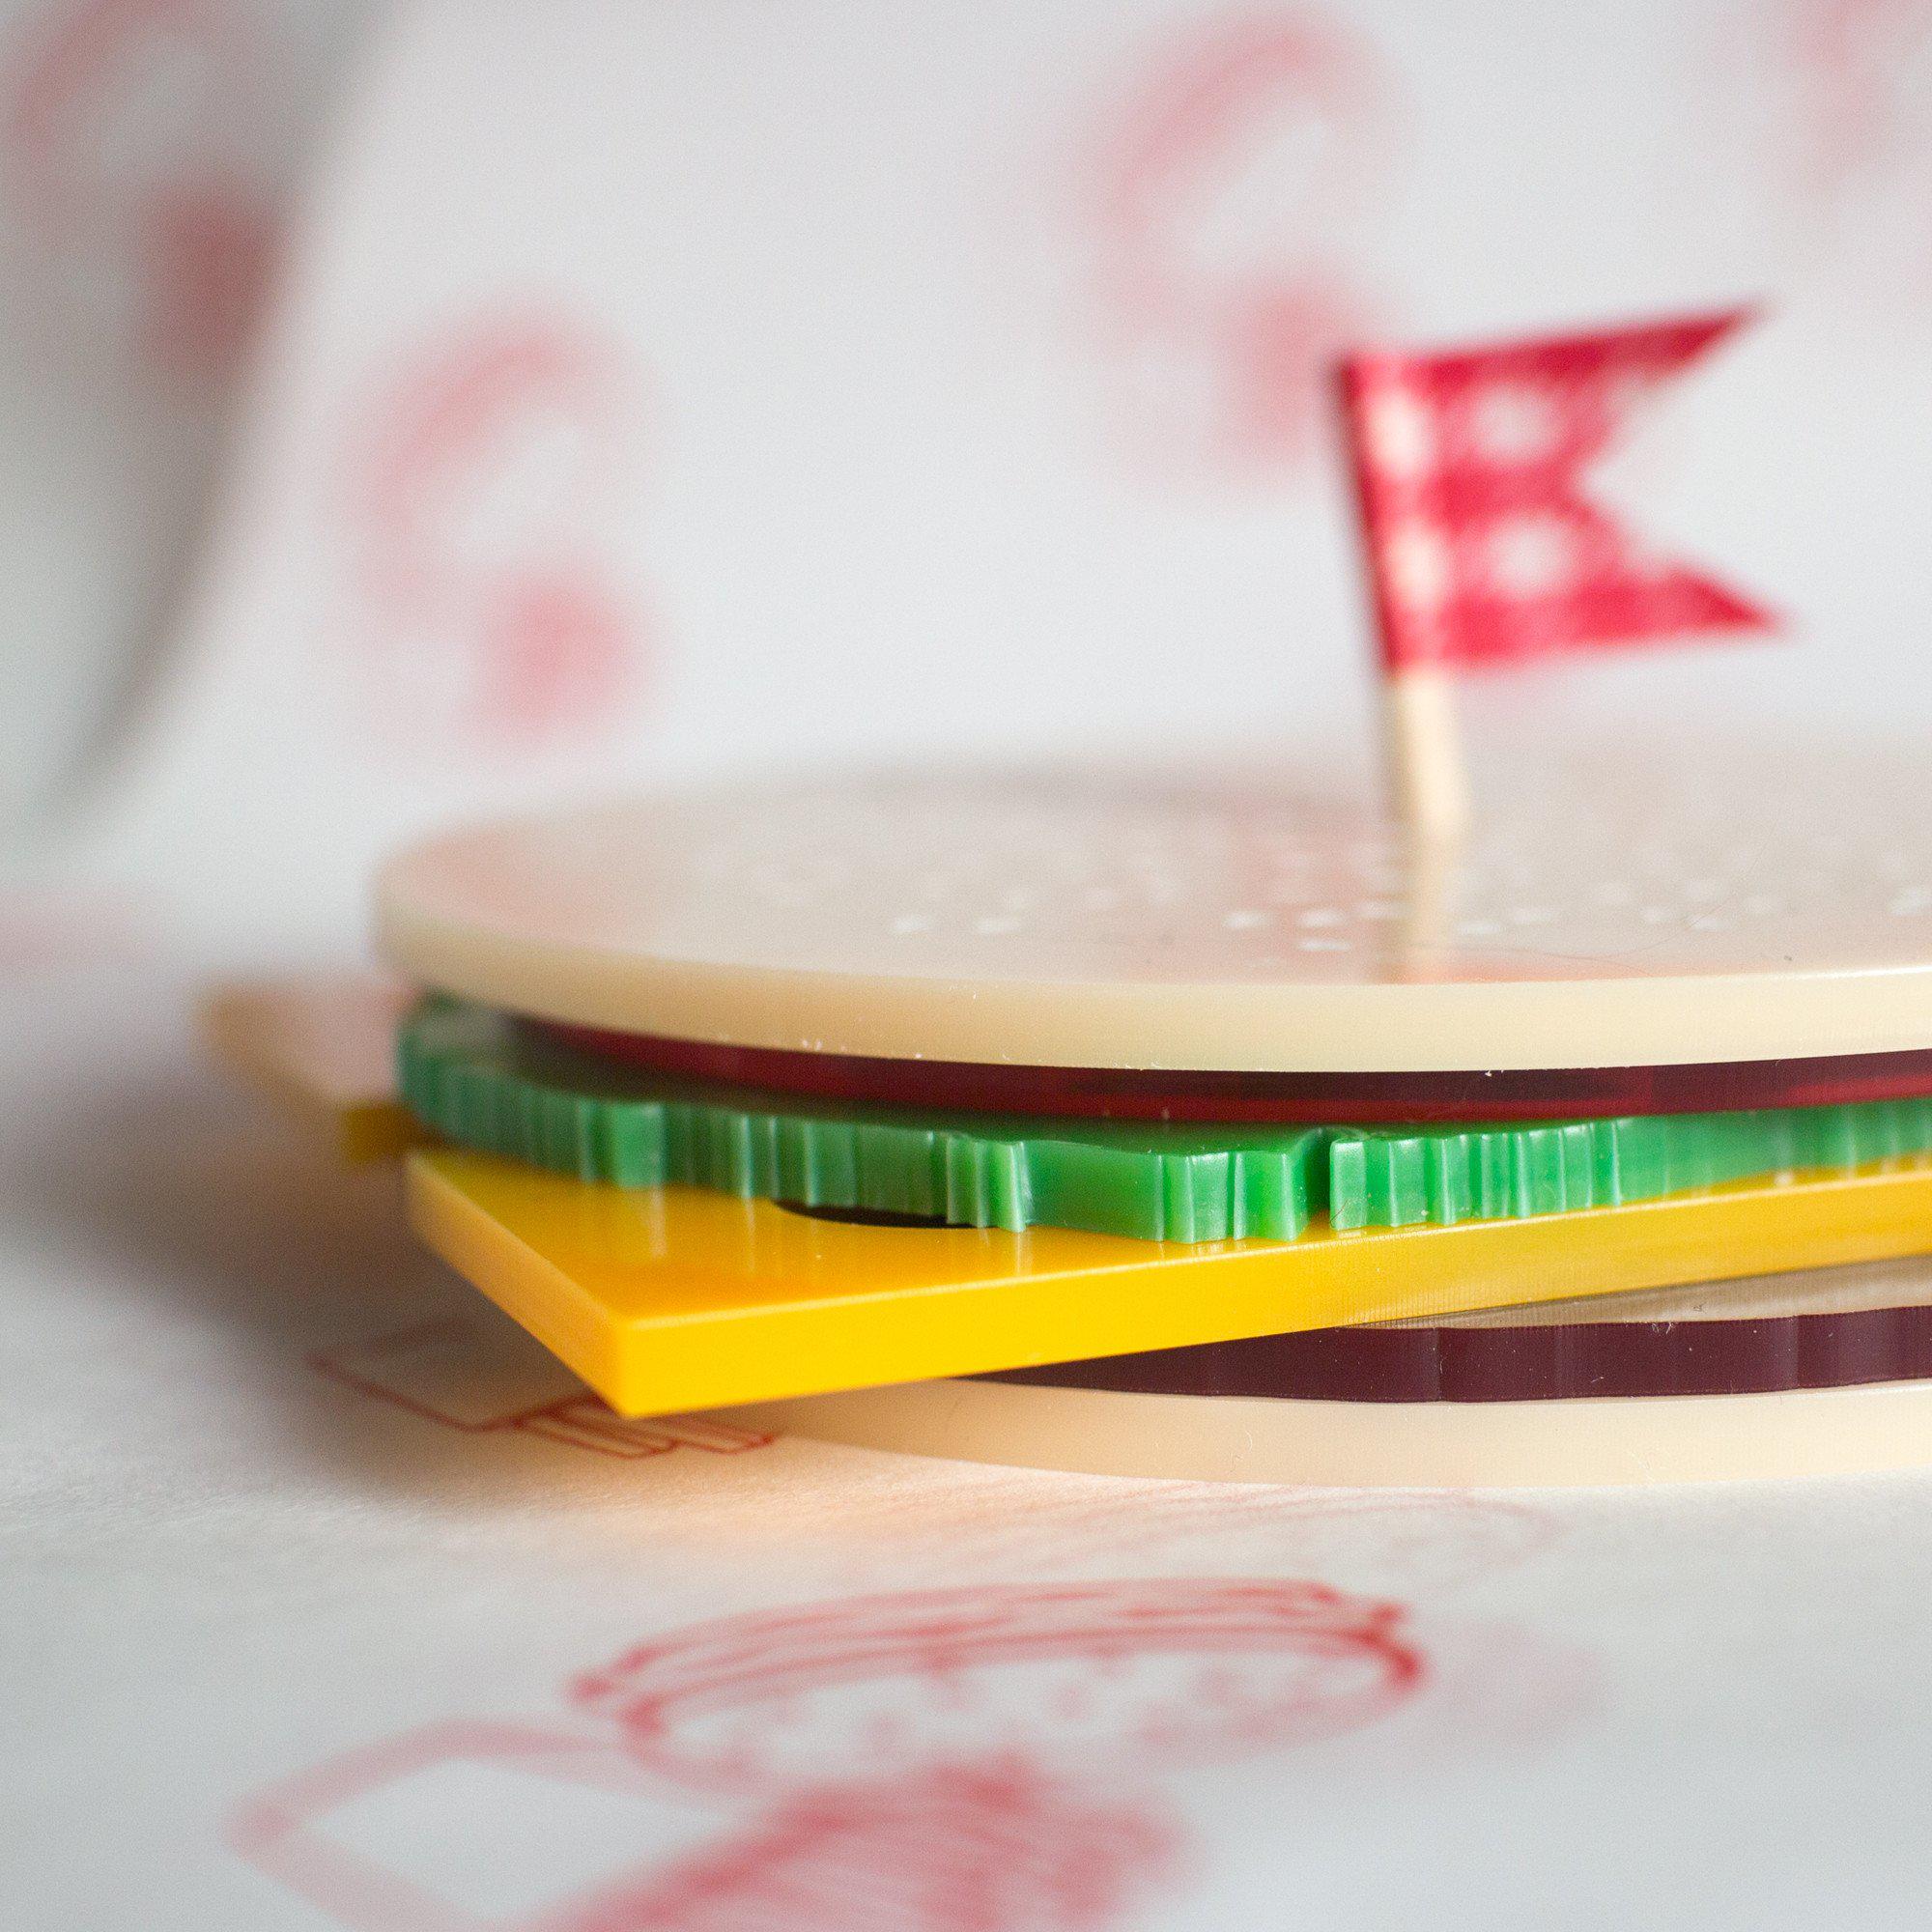 Side profile of burger coasters made by finest imaginary